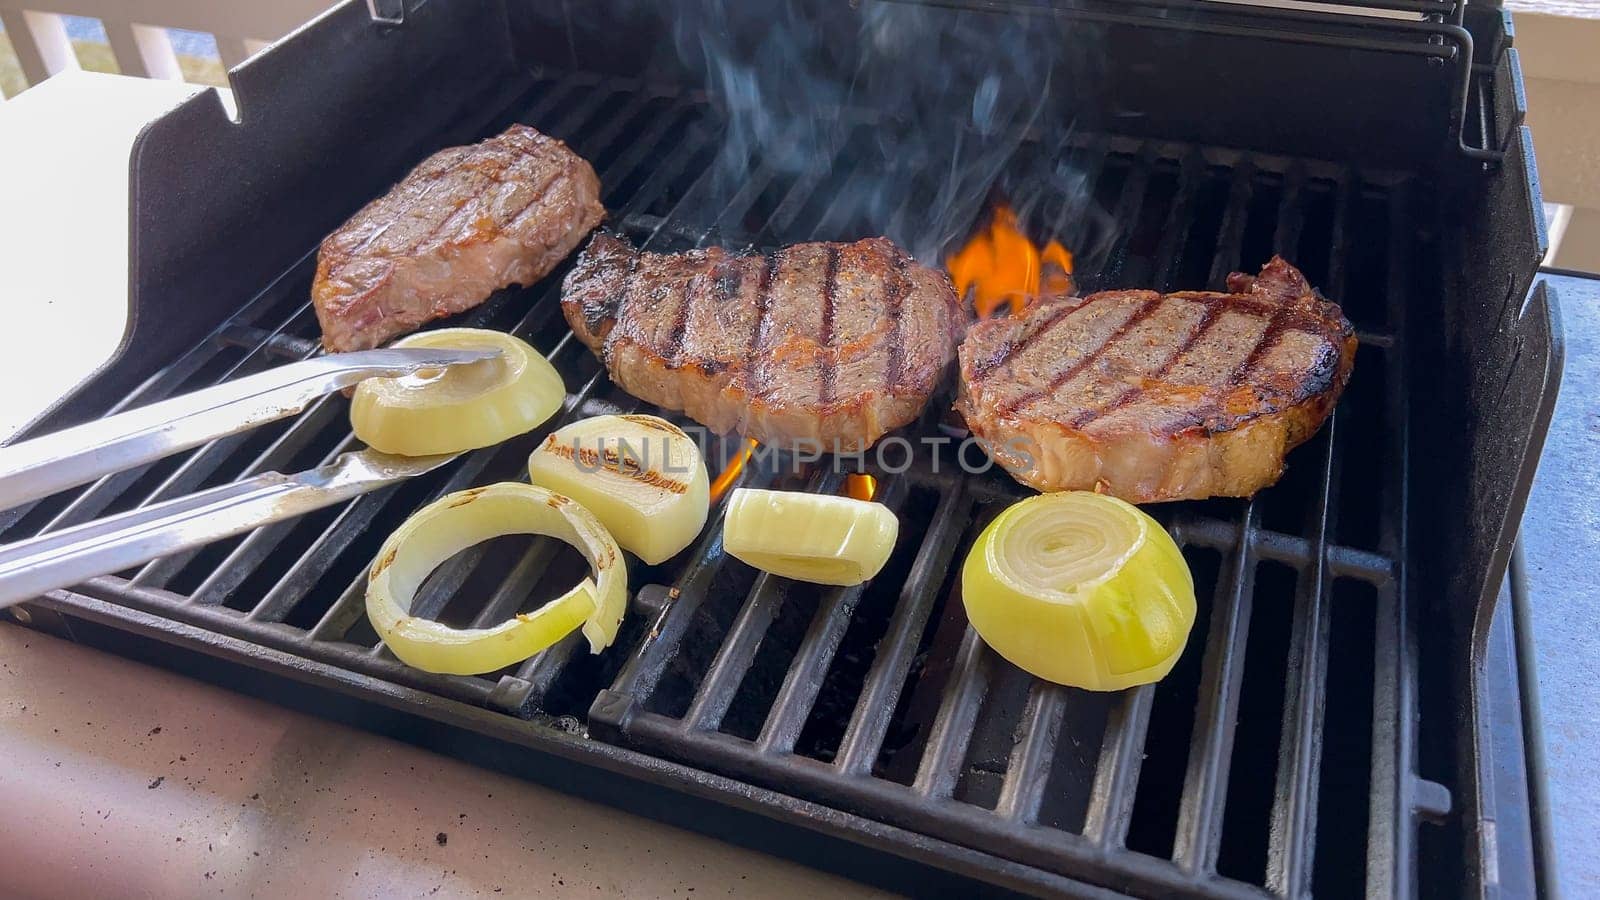 Summer Barbecue with Ribeye Steaks and Grilled Onions on the Grill by arinahabich